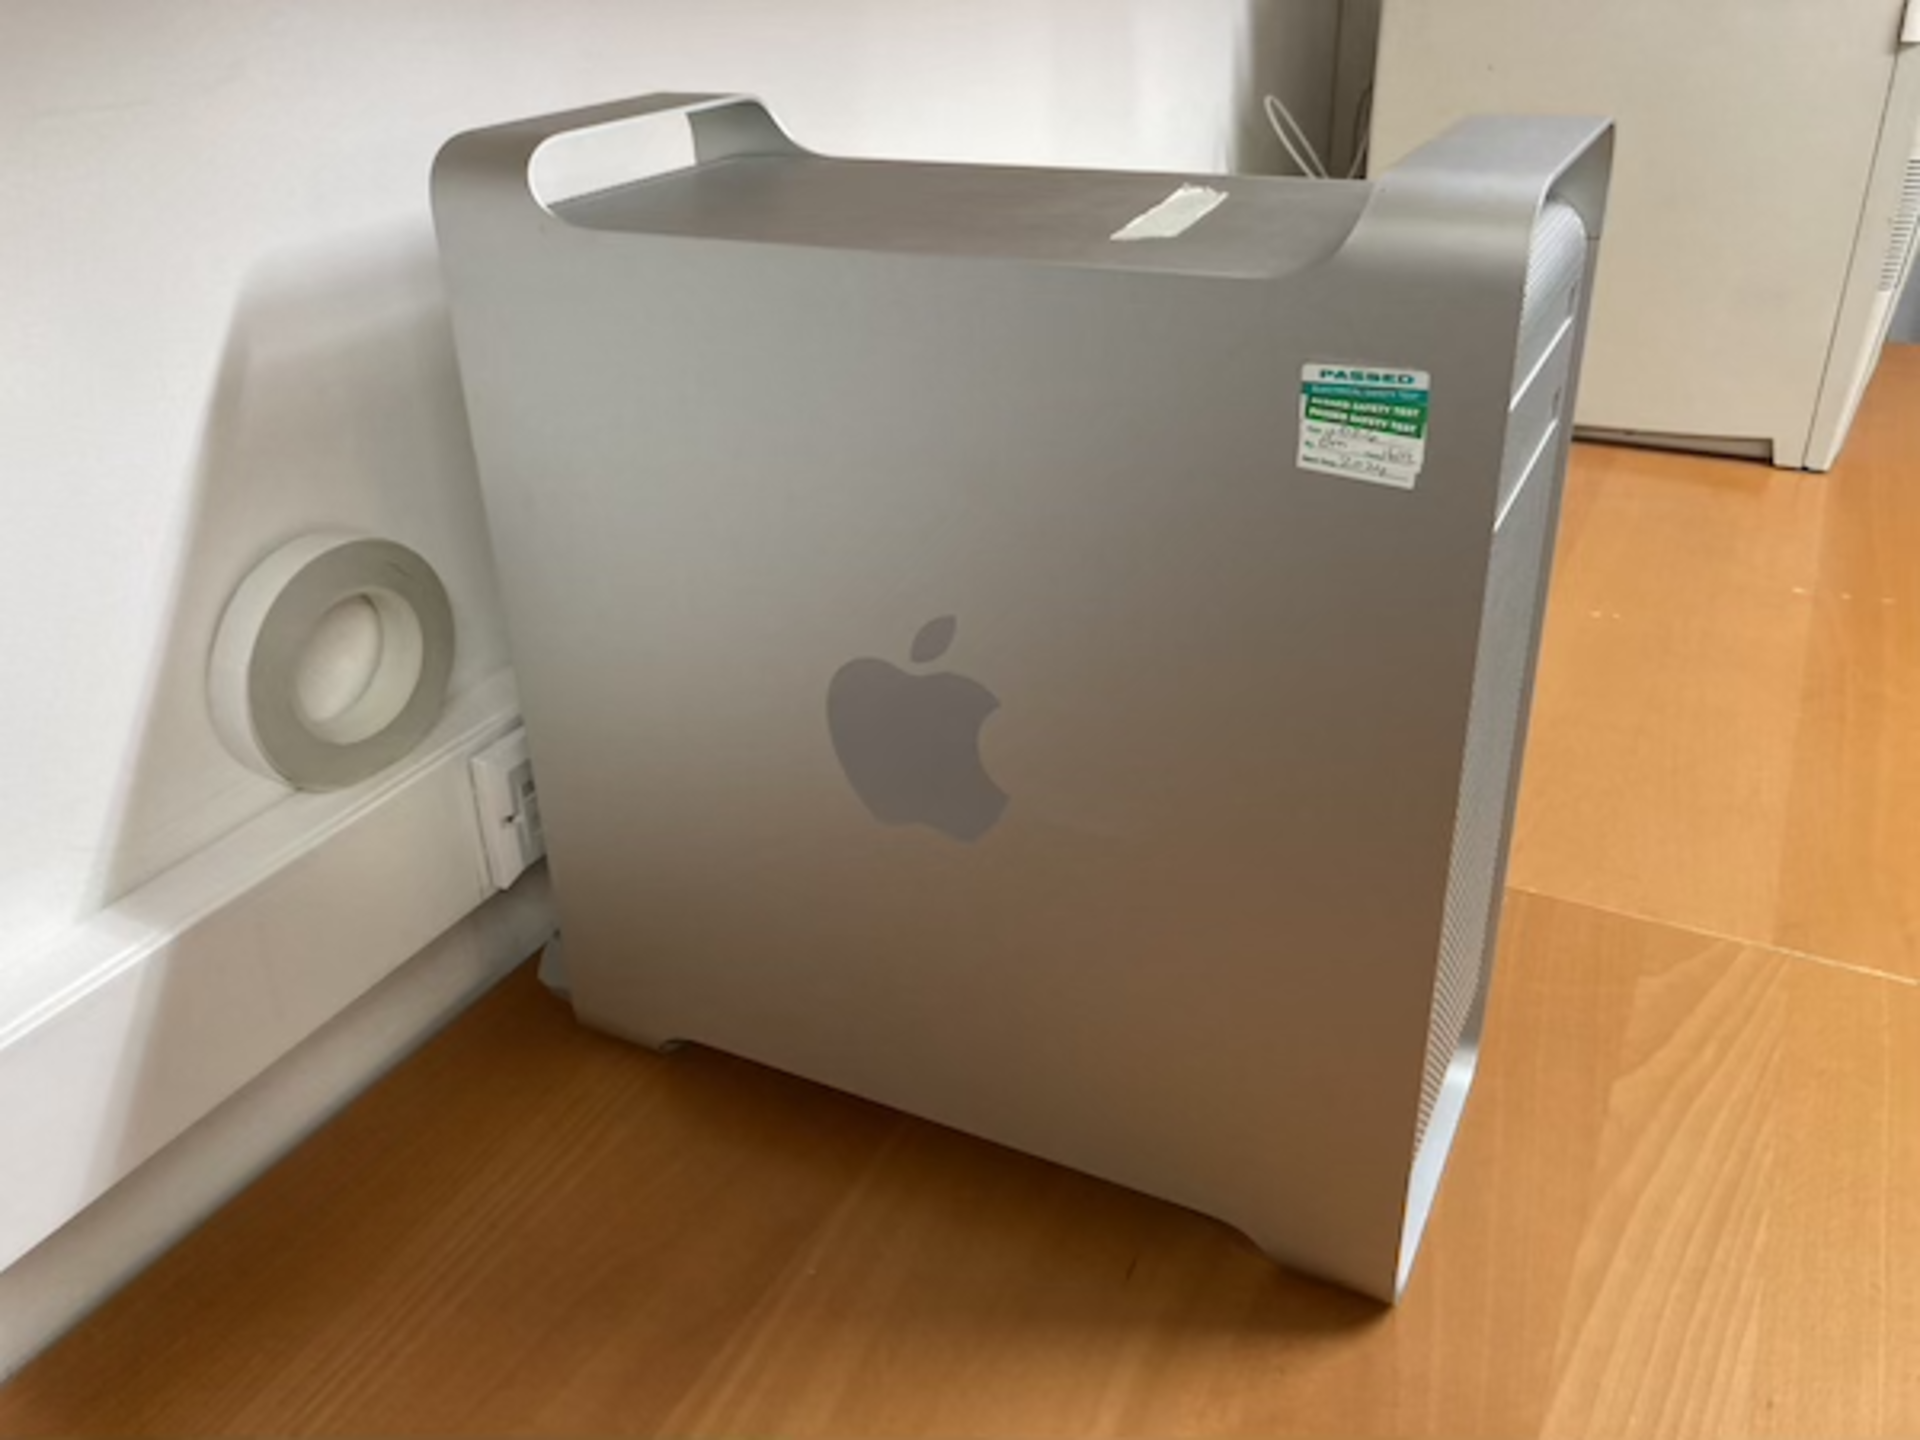 Apple MacPro model A1289 - Image 2 of 3